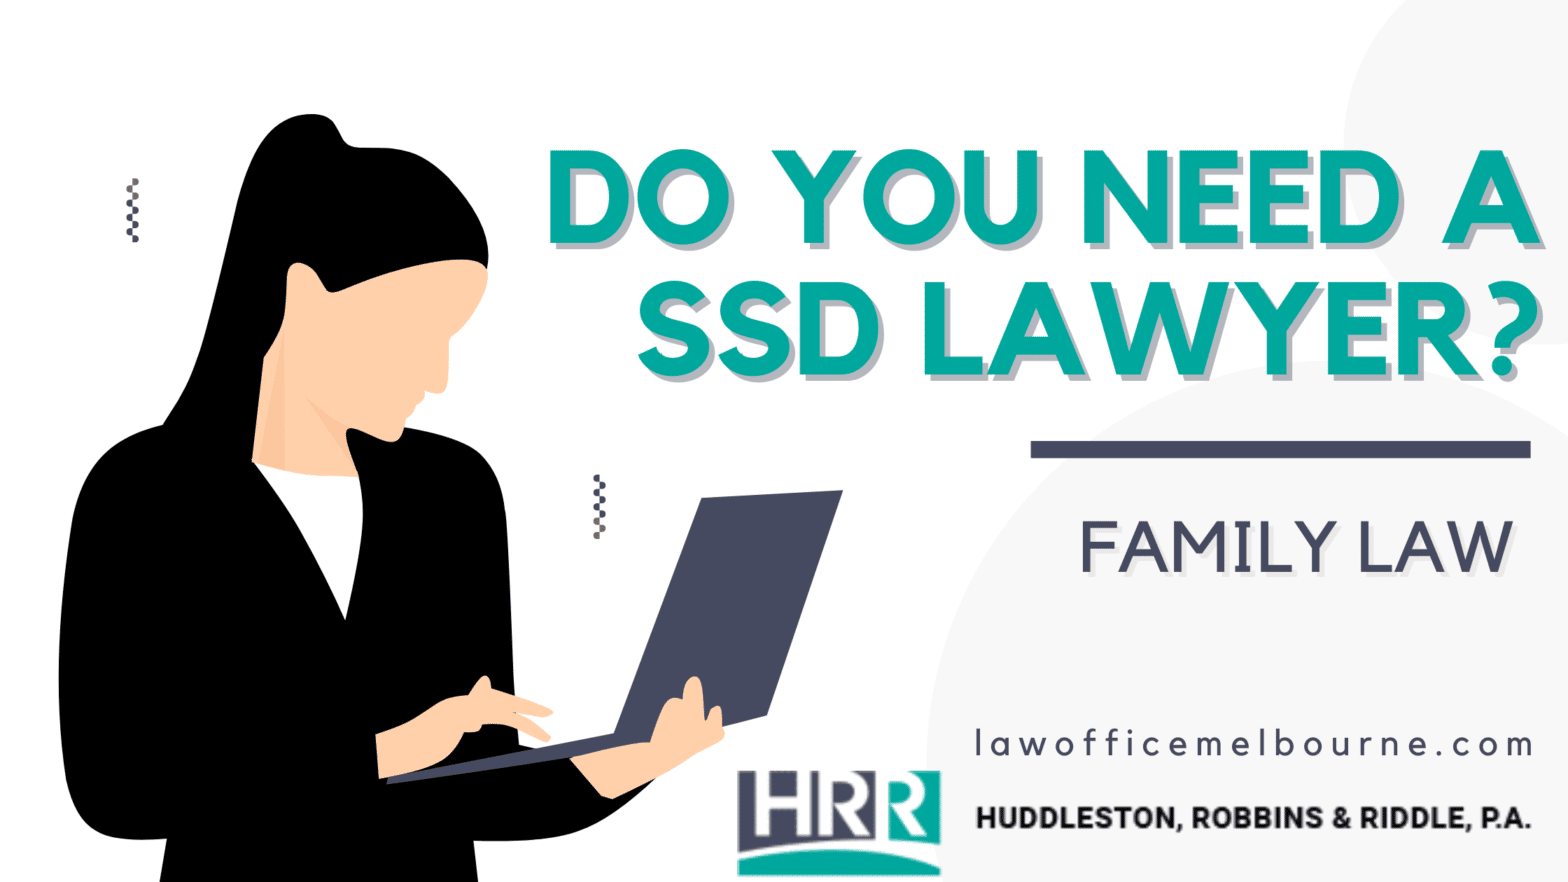 Do you need a Social Security Disability (SSD) lawyer?